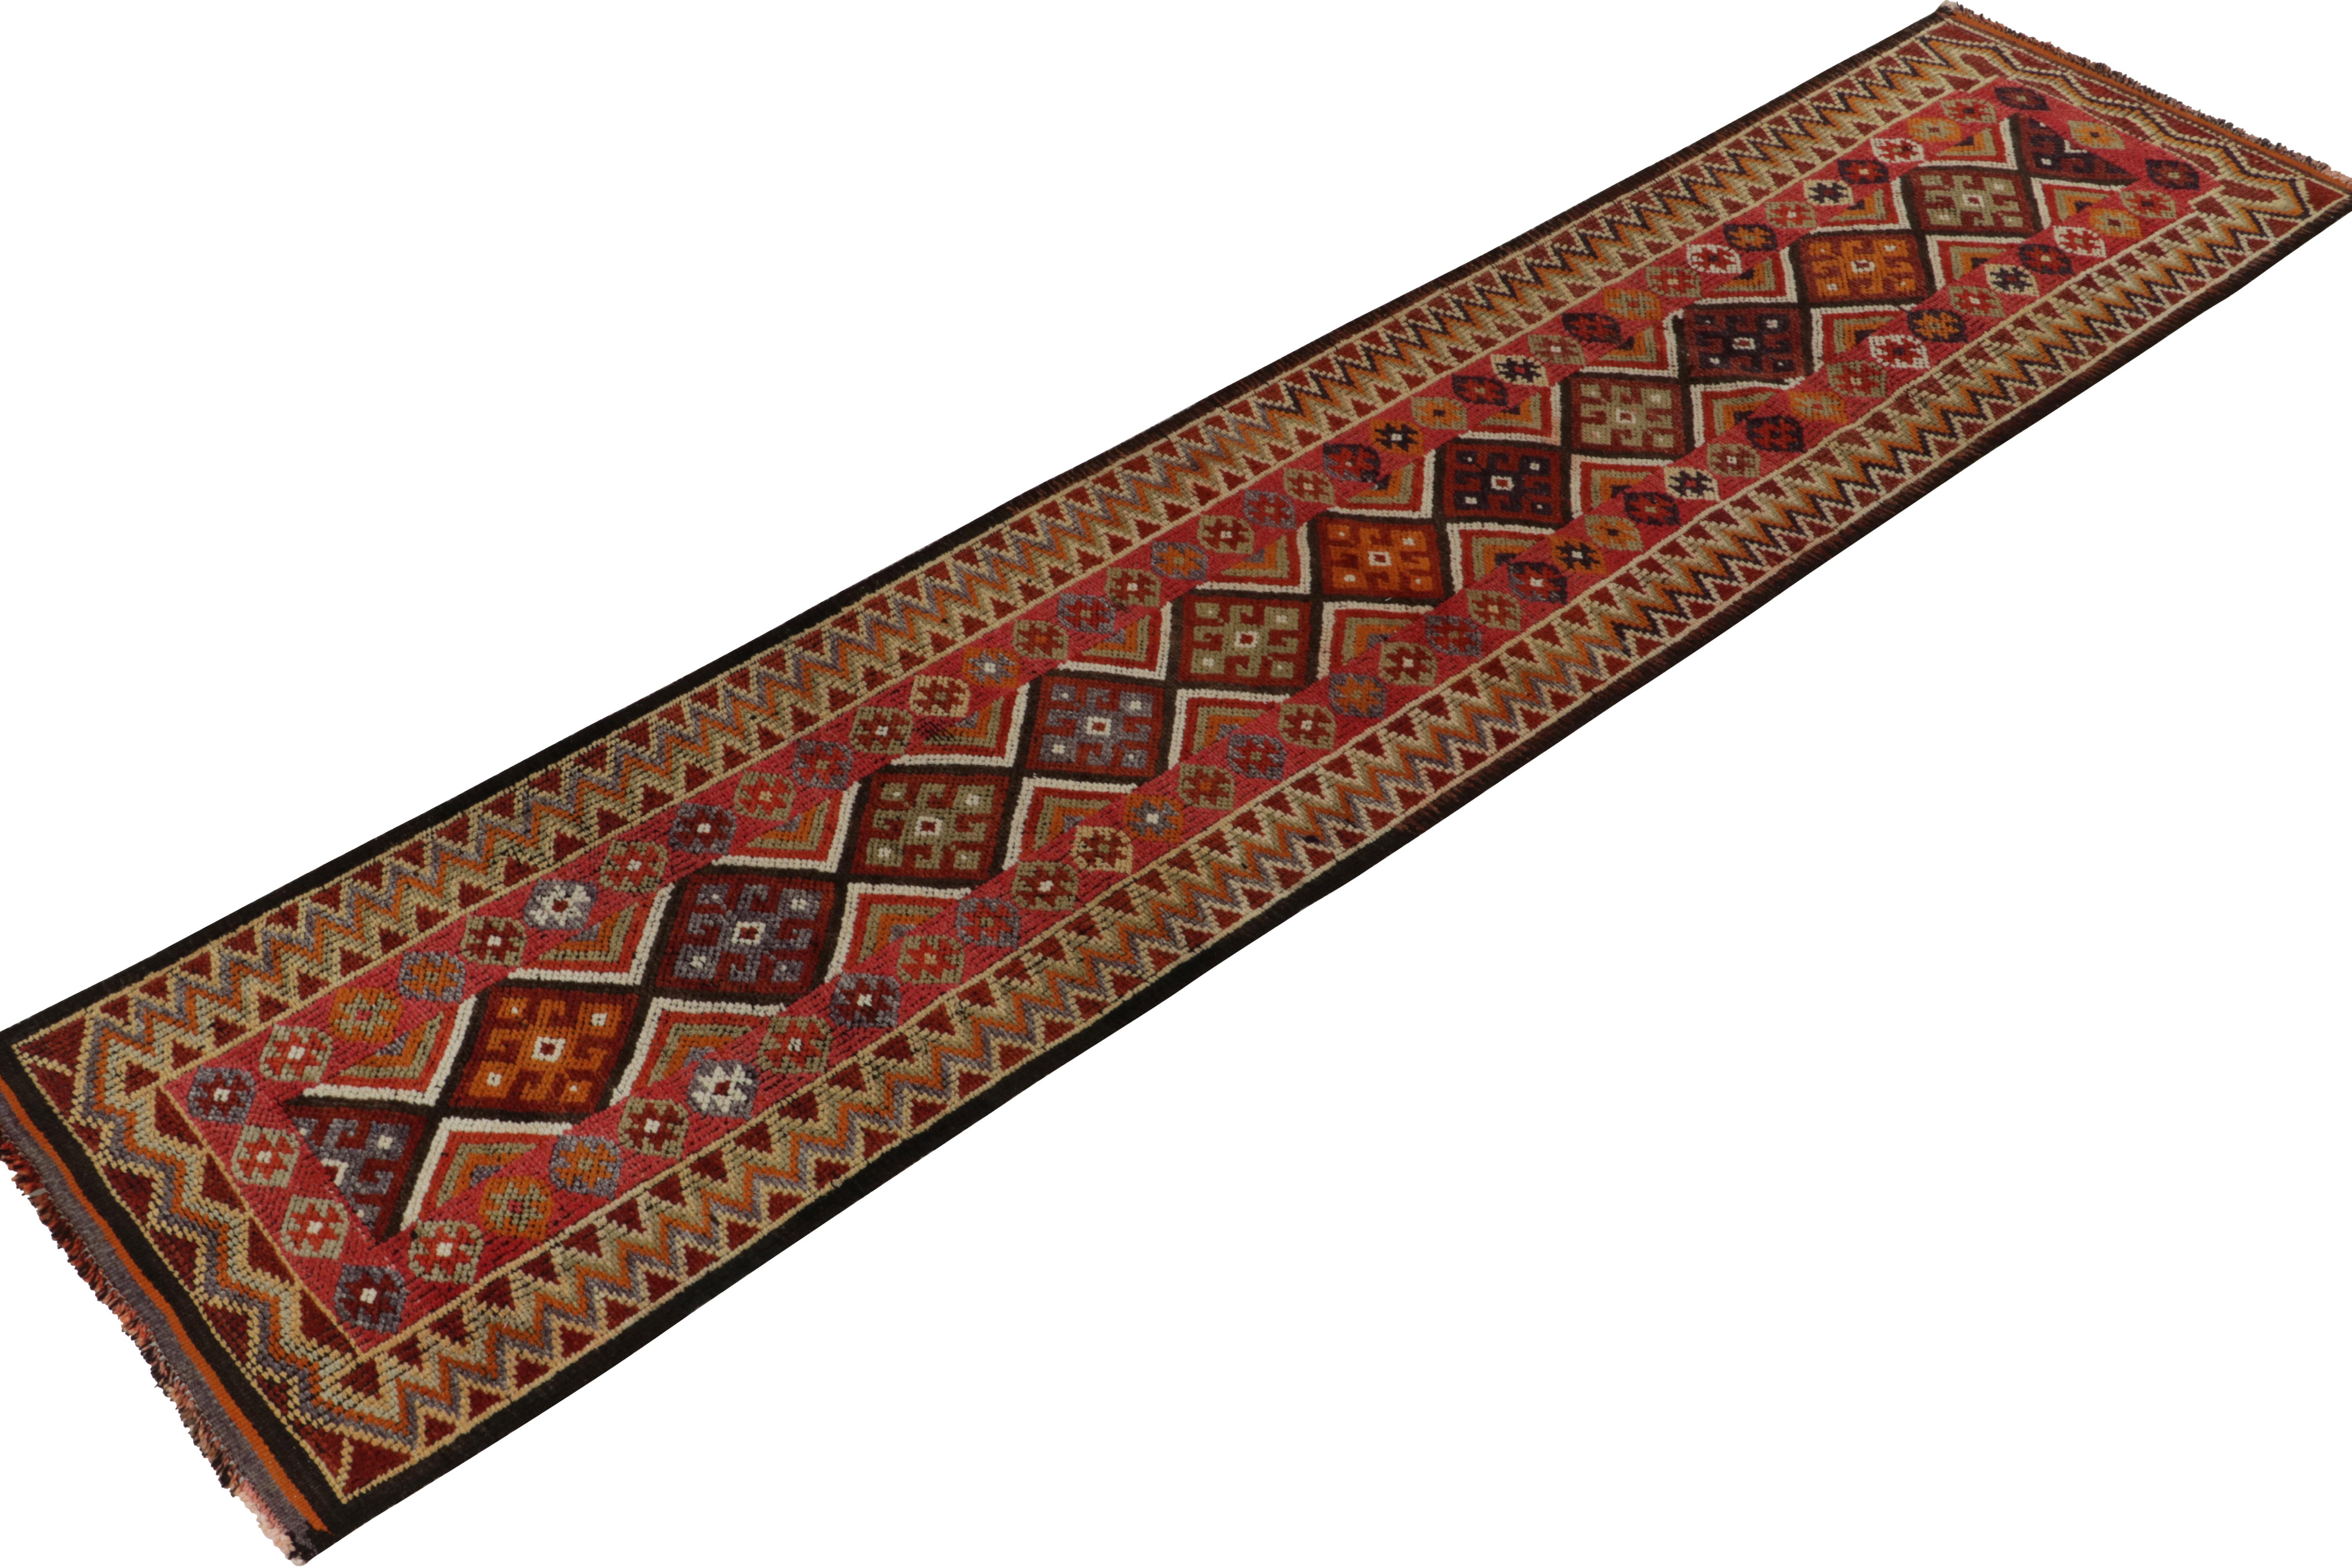 From R&K Principal Josh Nazmiyal’s latest acquisitions, a distinguished vintage runner originating from Turkey circa 1950-1960. 

On the Design: The symmetric geometric design features traditional motifs encased in diamond patterns continuing from